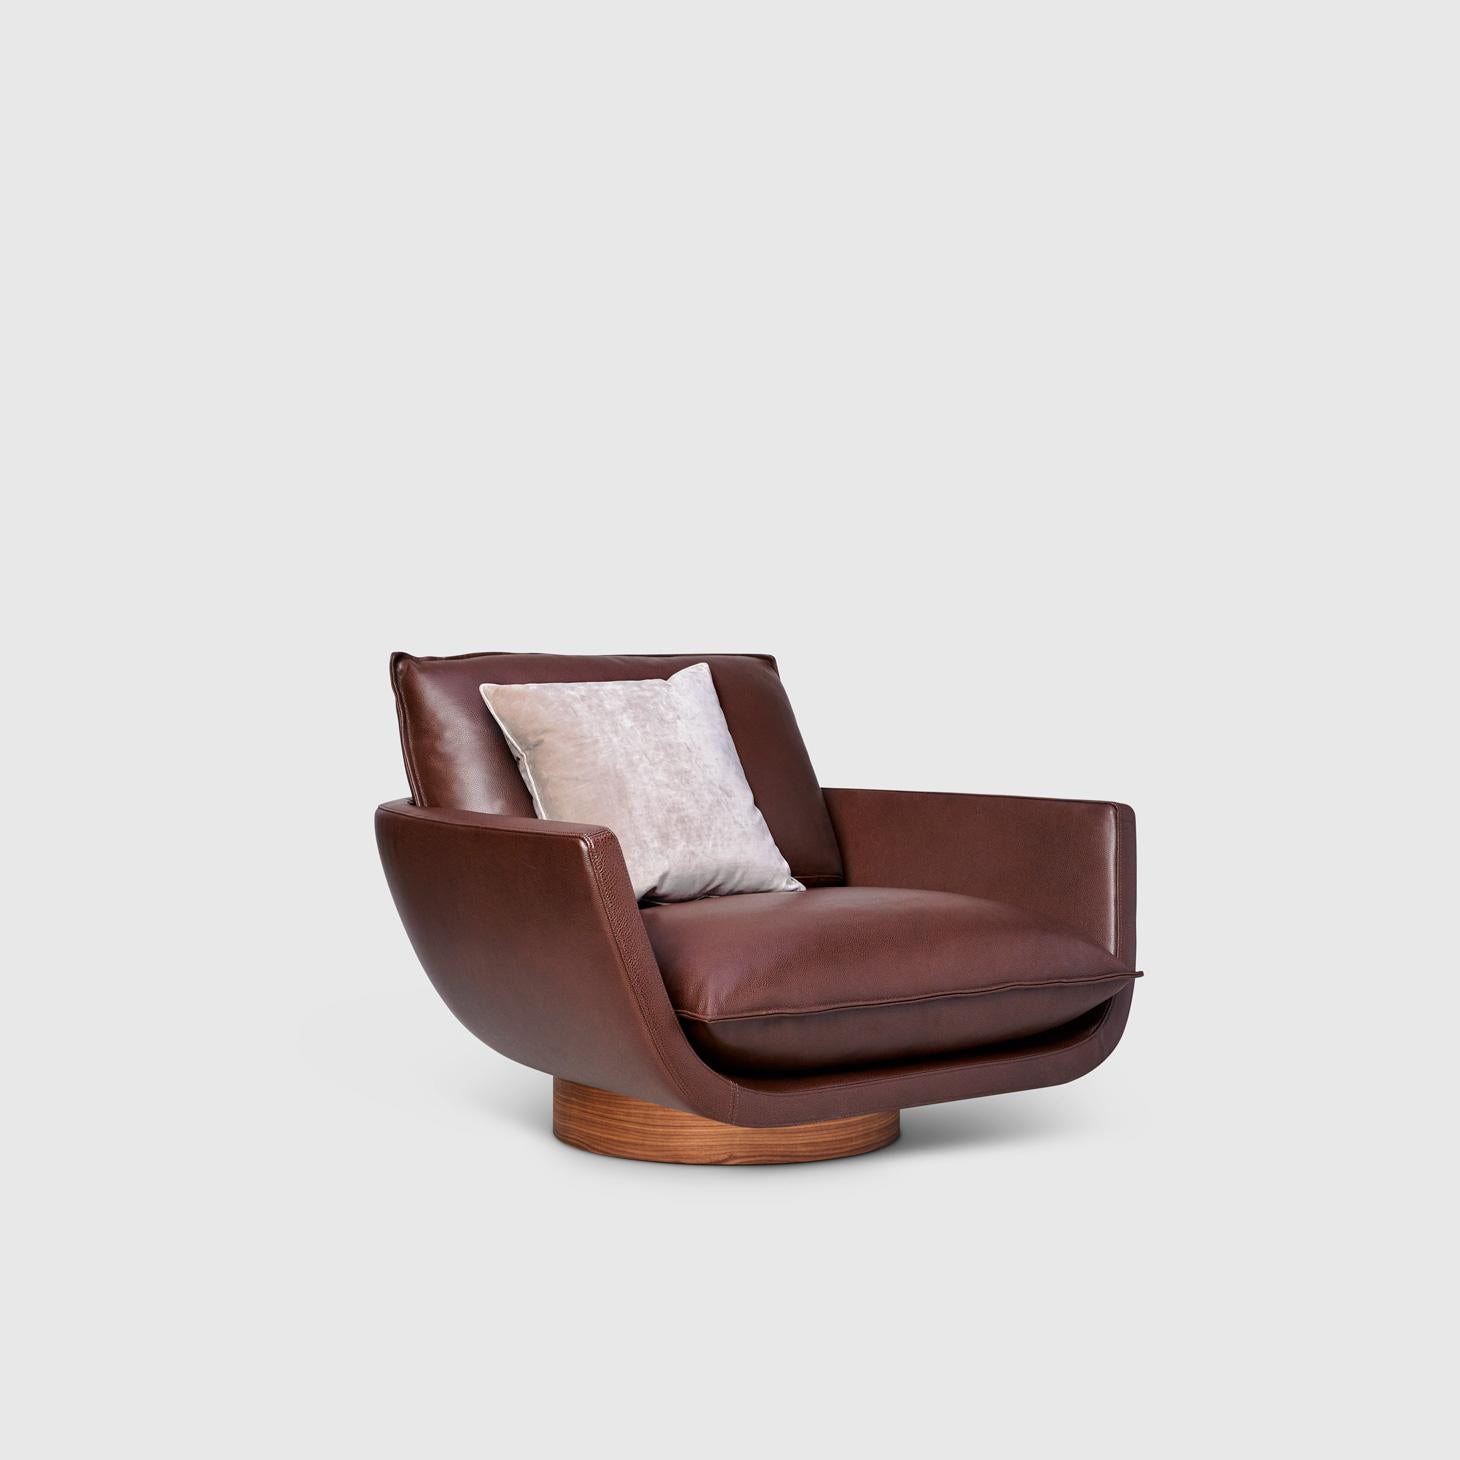 Italian Rua Ipanema Lounge Chair by Yabu Pushelberg with Client's Own Material  For Sale